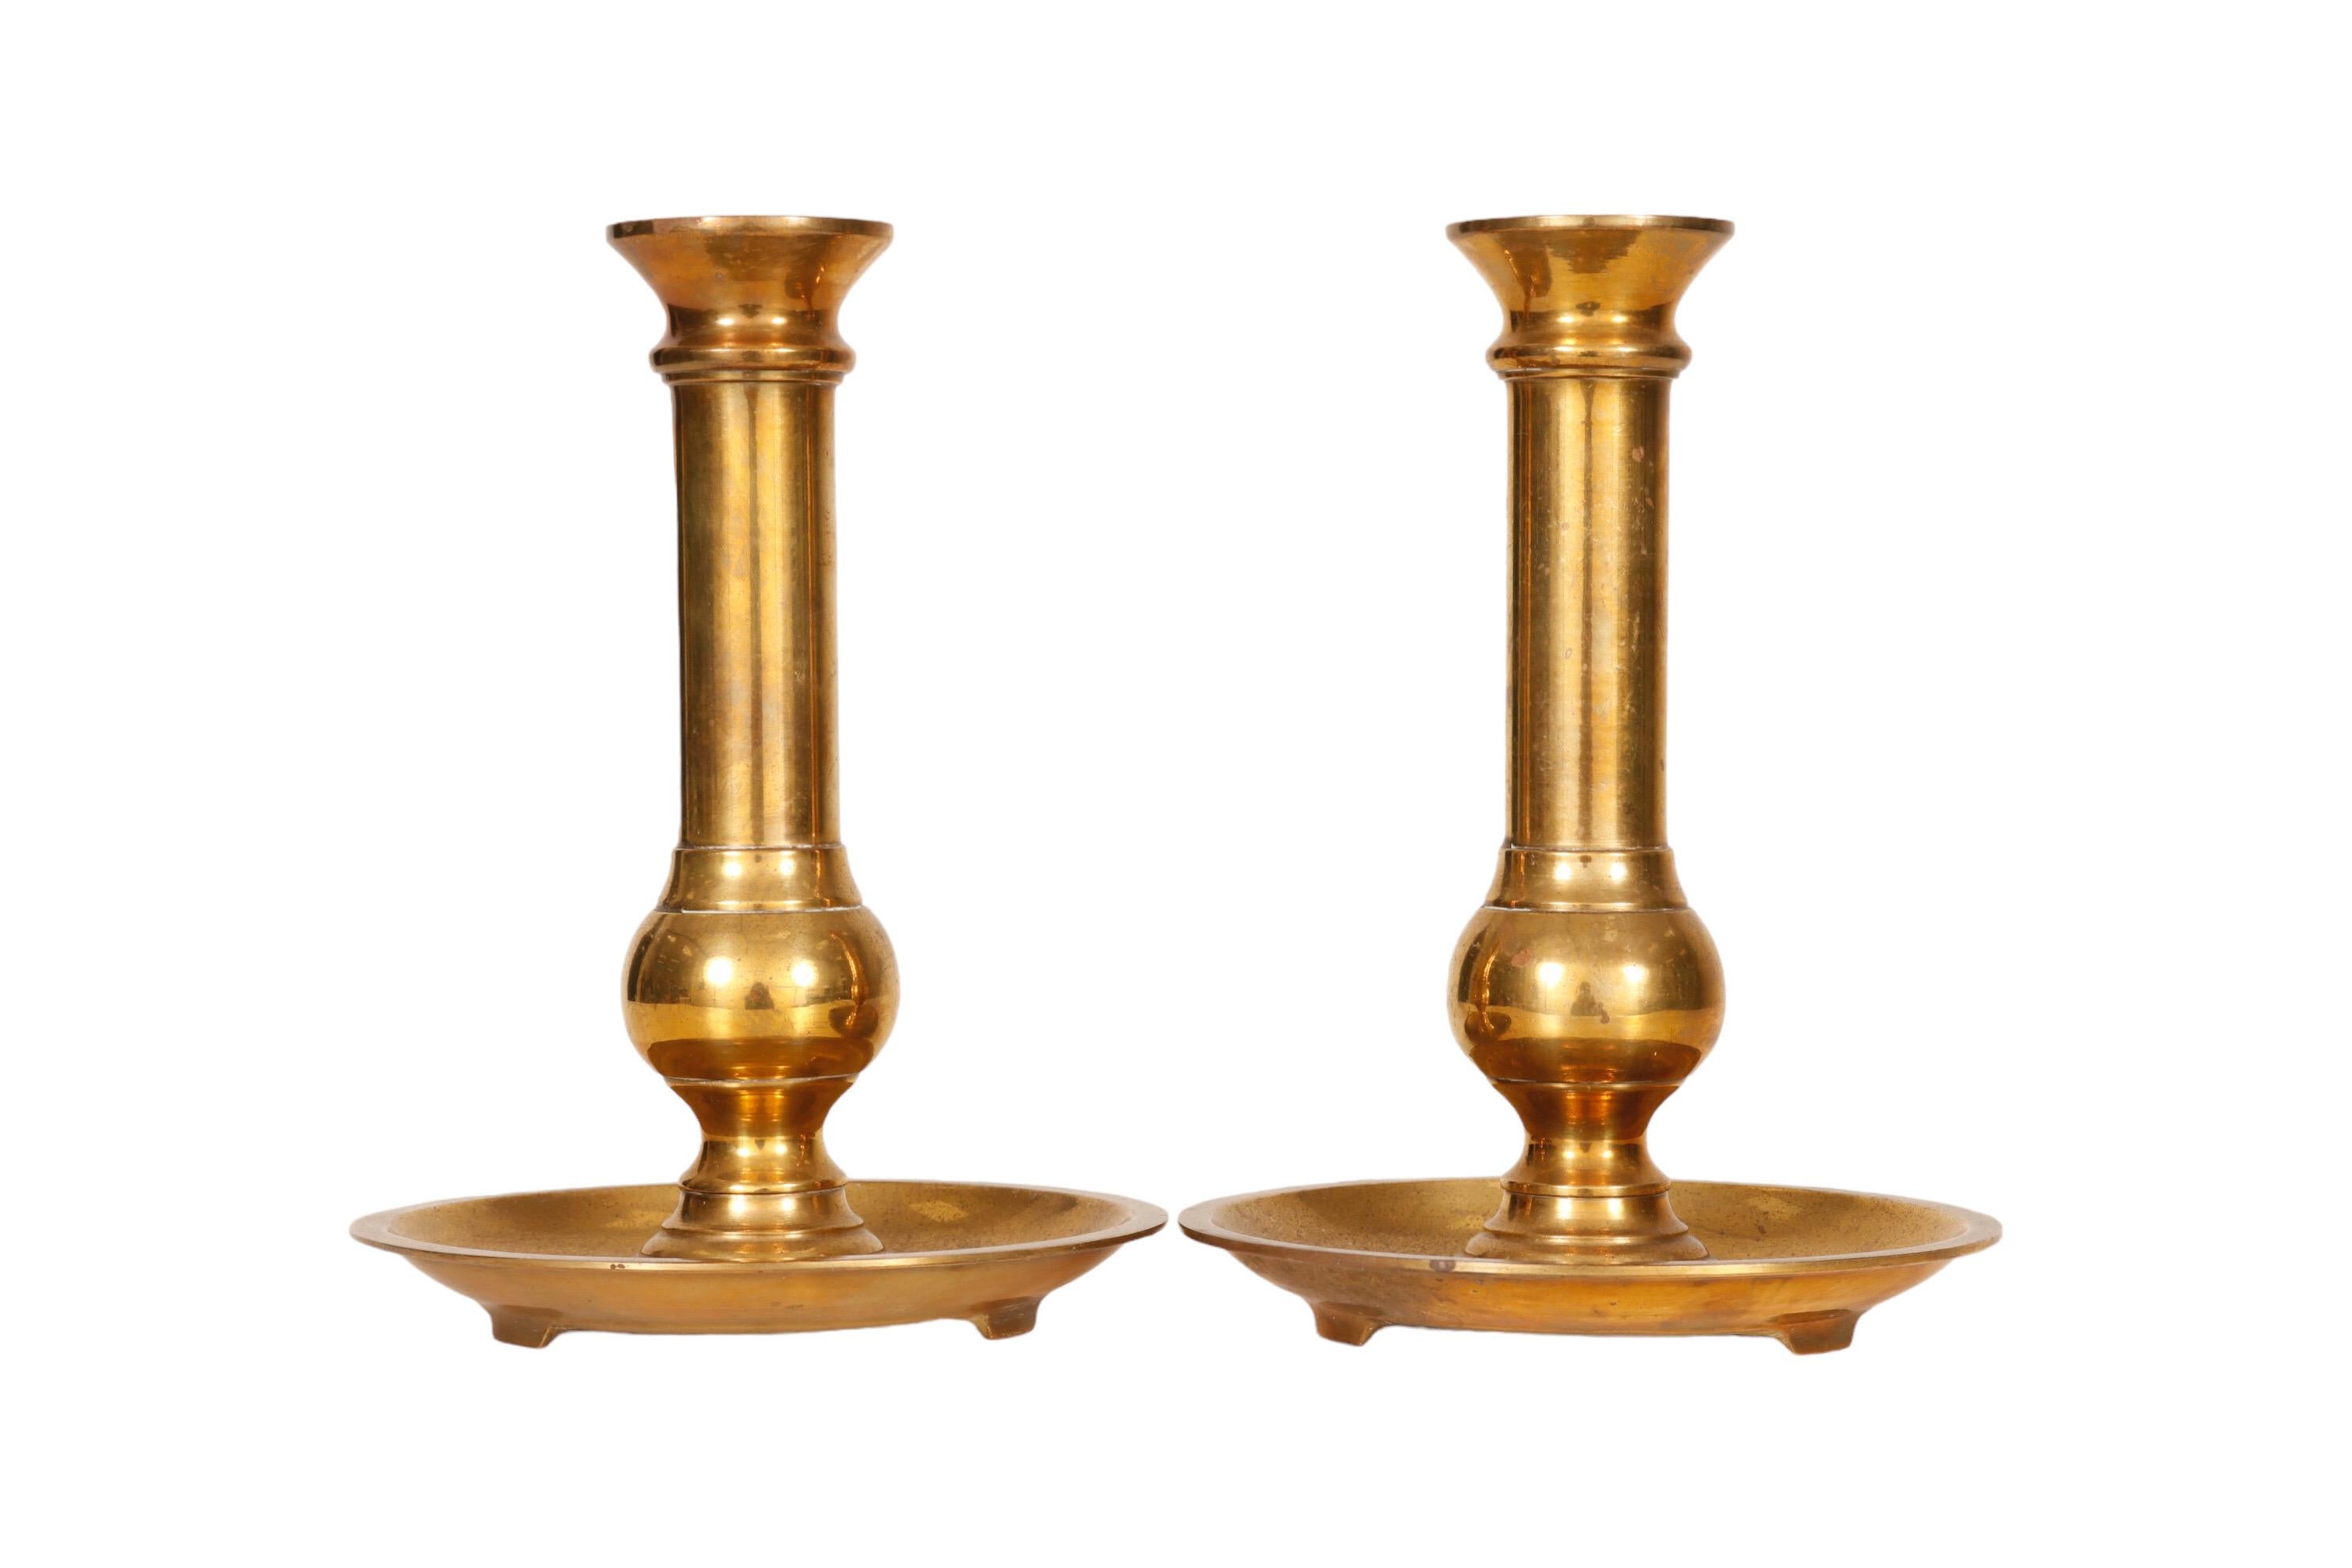 A pair of traditional brass candlestick holders made by Neiman Marcus. Simple columns with ball shaped turned bases sit in wide drip pans, each with three feet. Maker's label can be seen underneath. Dimensions per candlestick.